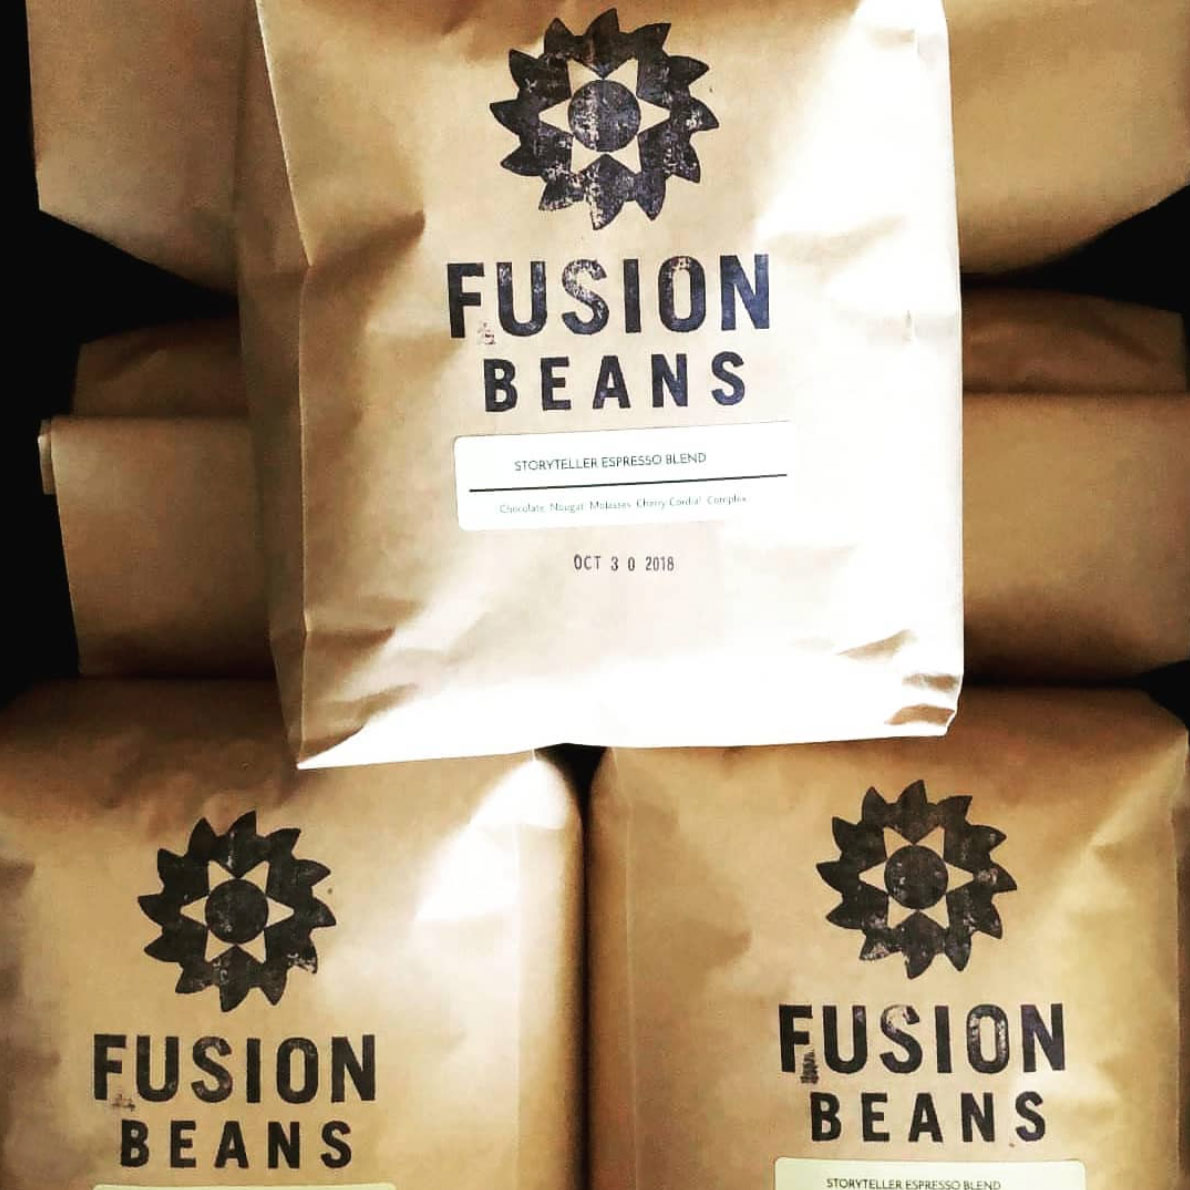 Retail packaging for Fusion Beans